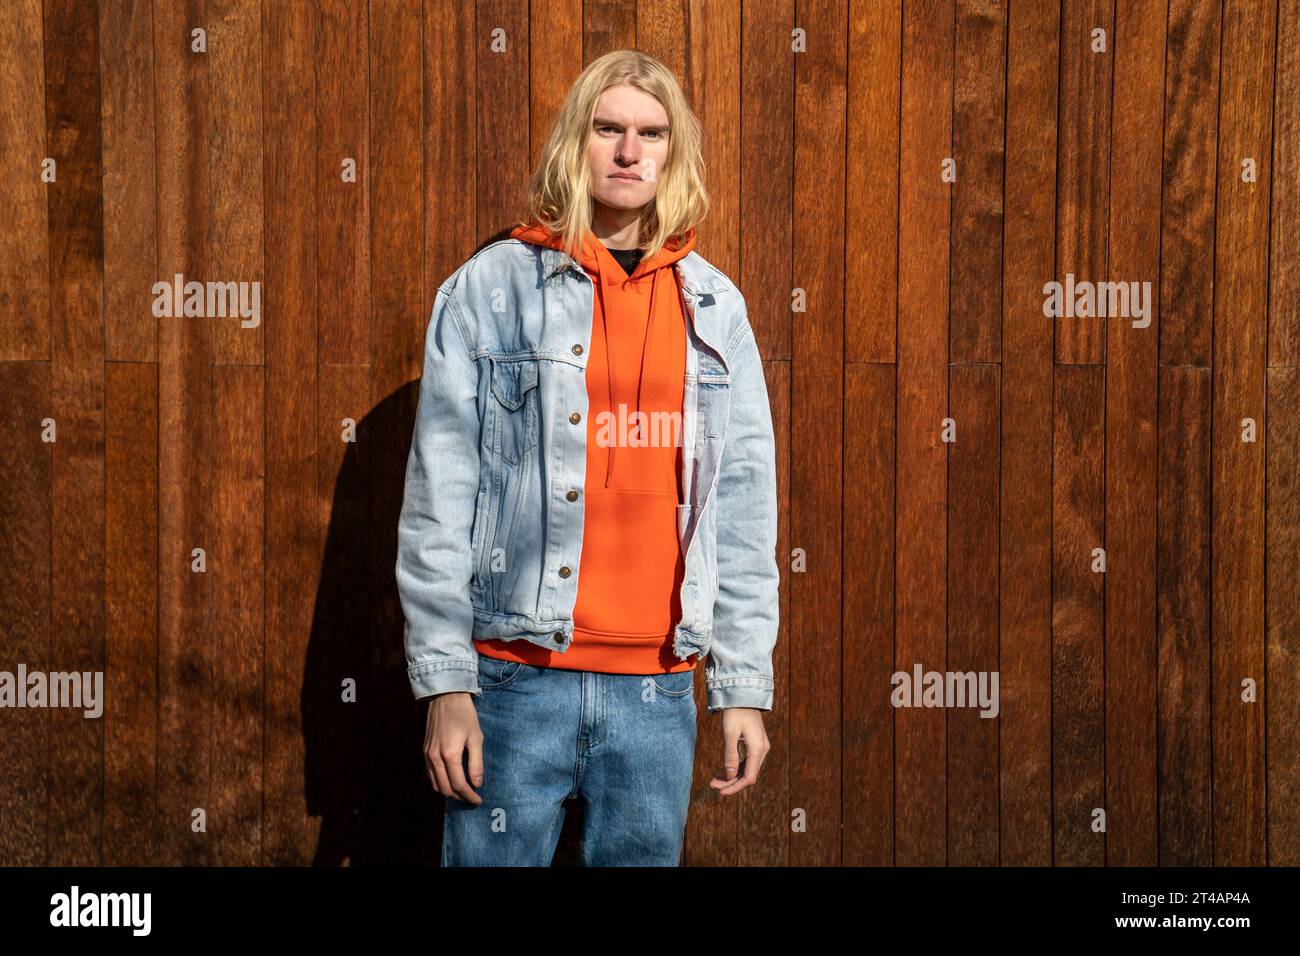 Apathetic blond long hair man scandinavian androgynous appearance stands near wooden fence. Stock Photo